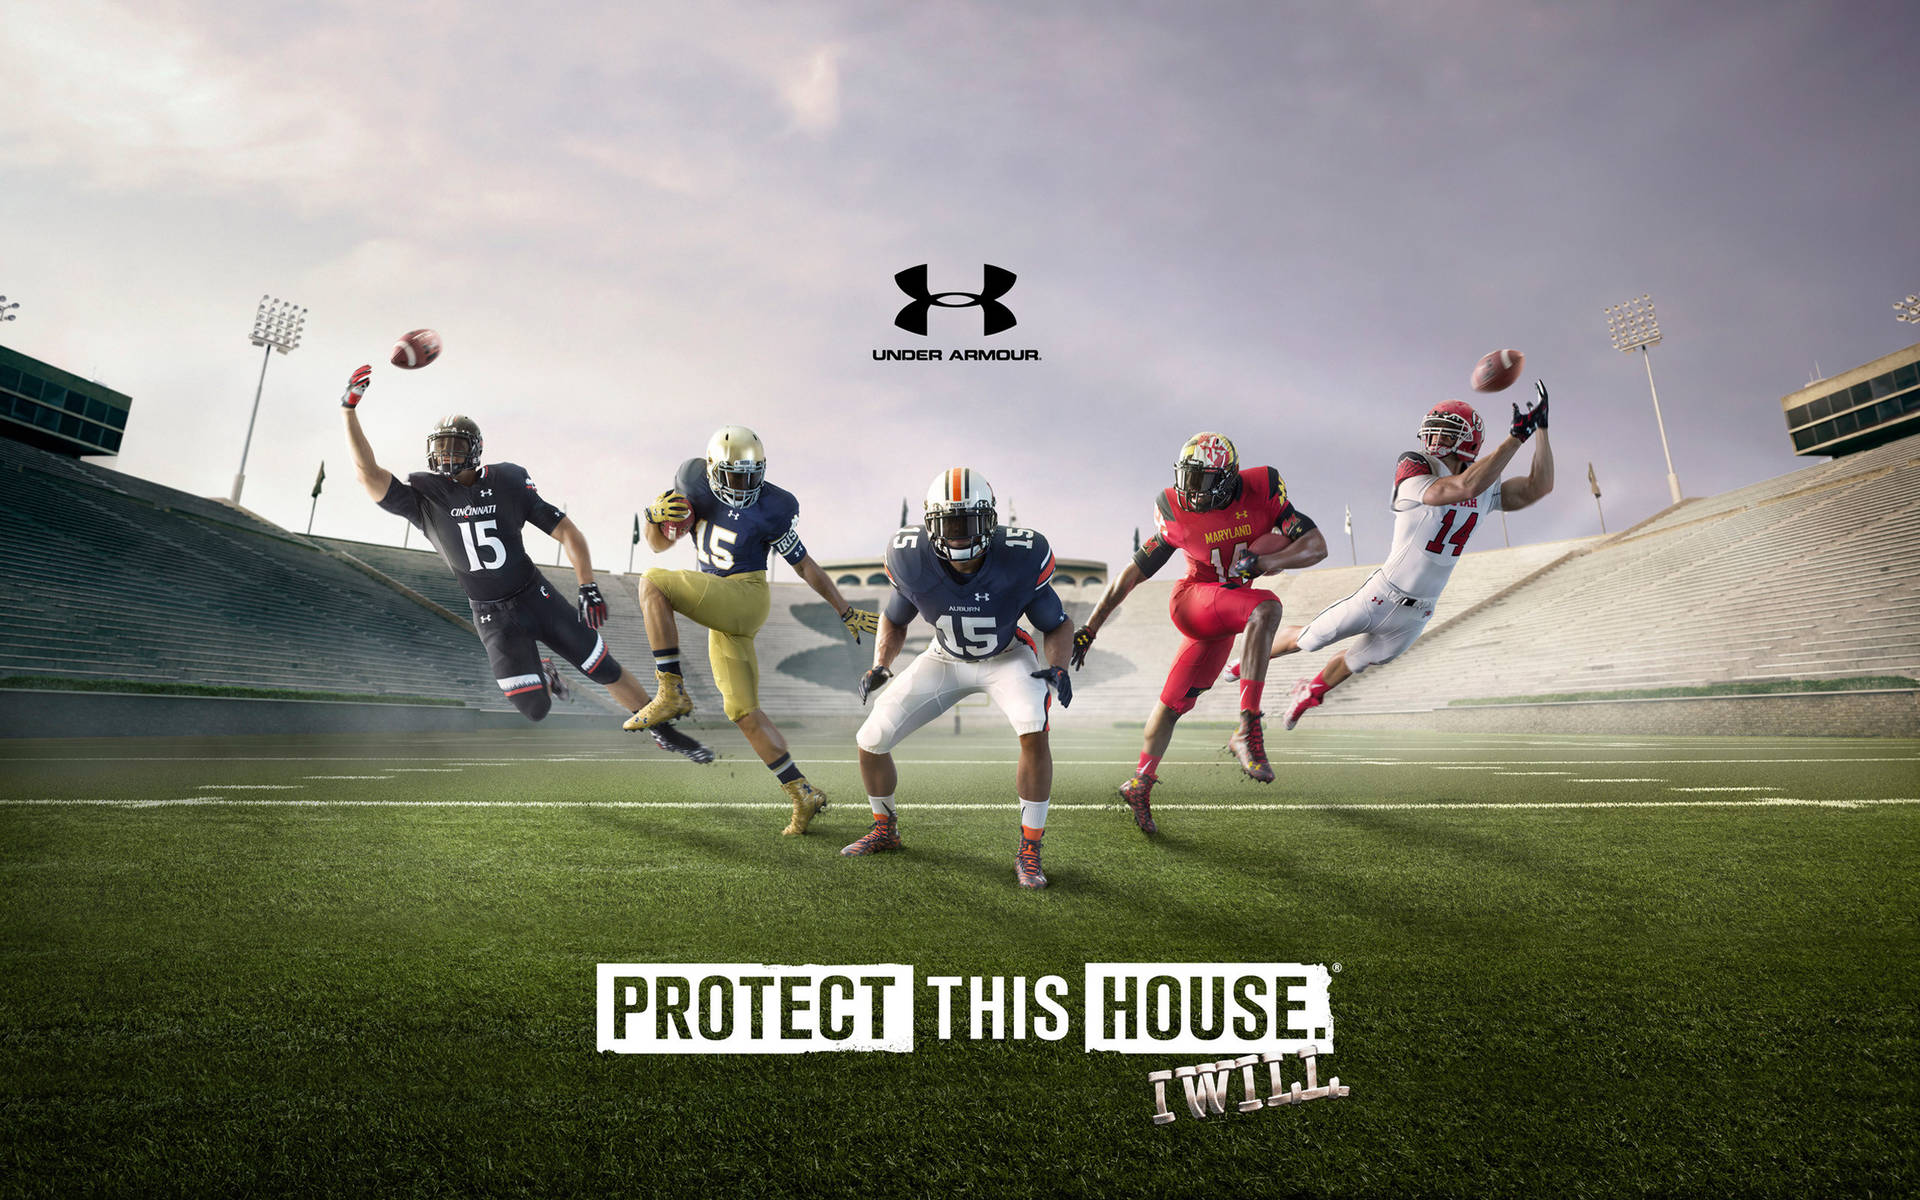 Under Armour Protect This House